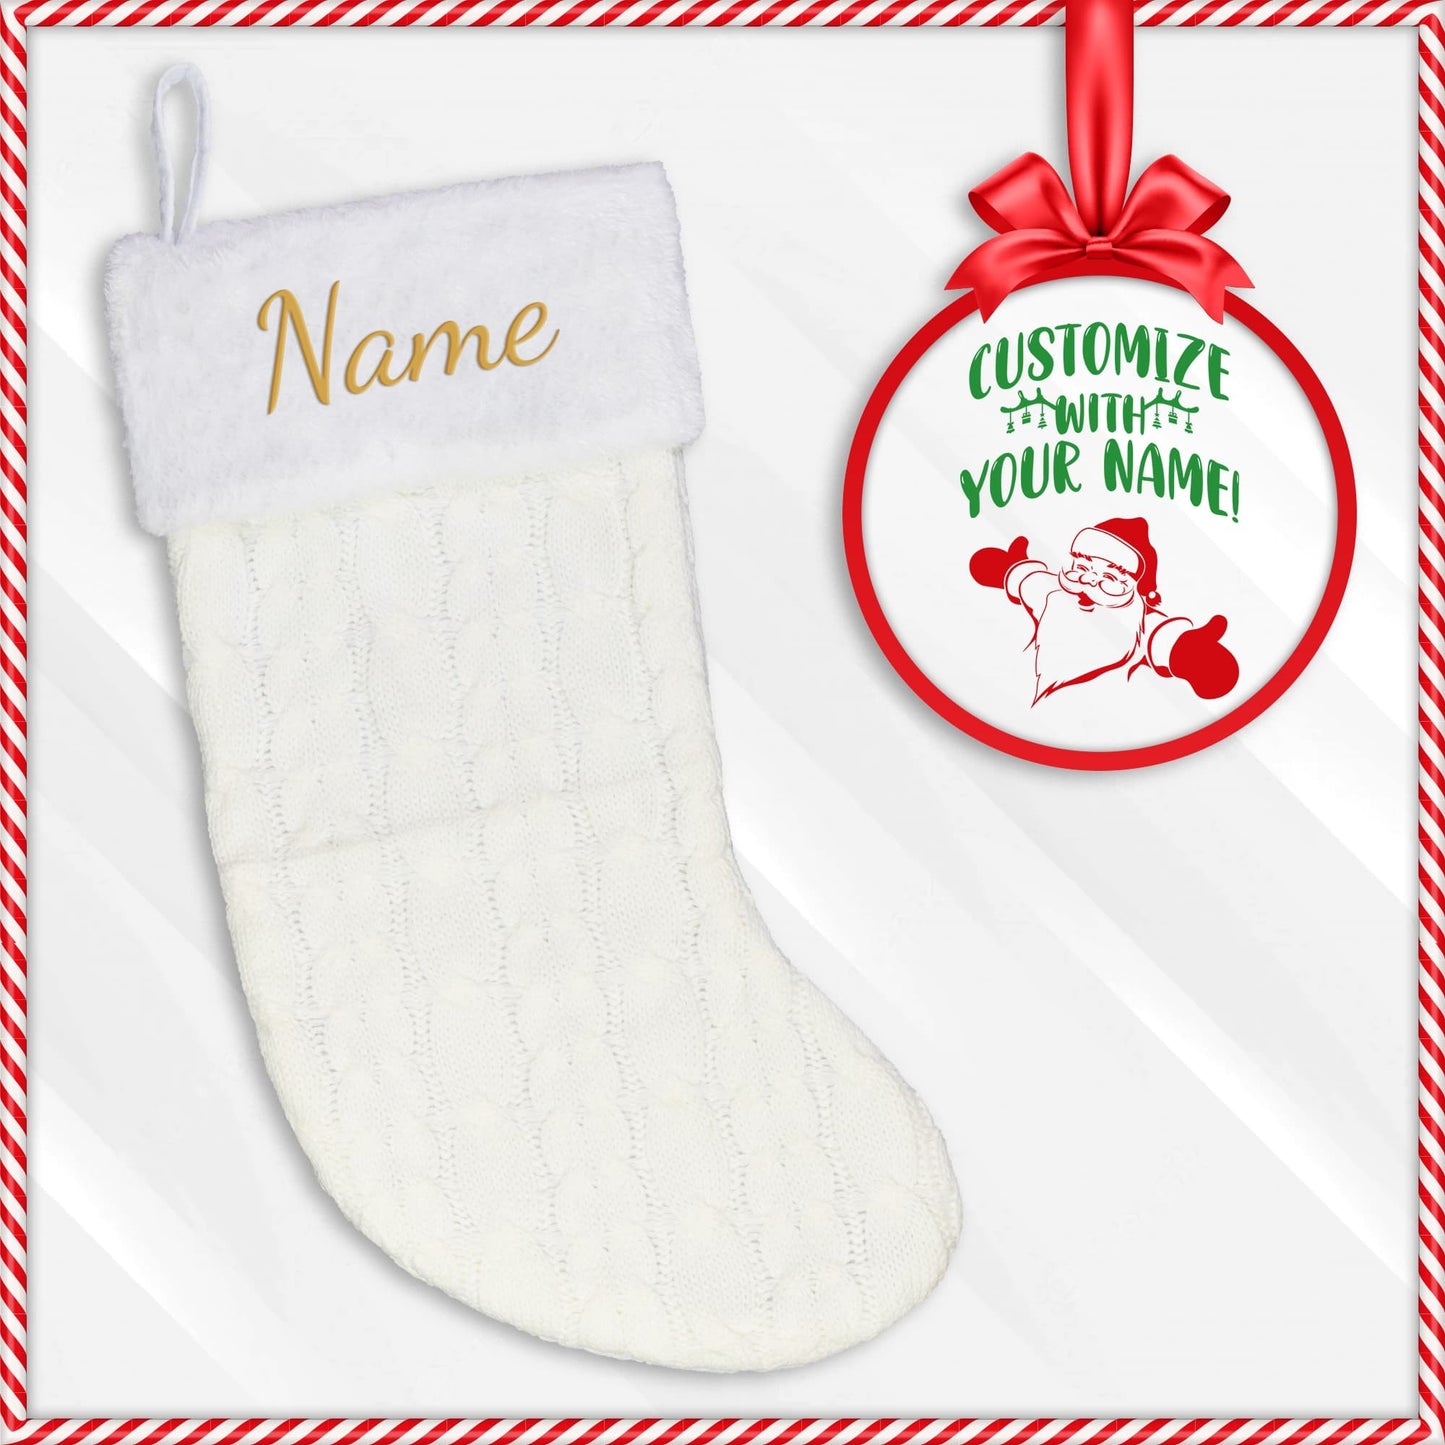 Personalized Embroidered Christmas Stocking -Fireplace Stockings 16"